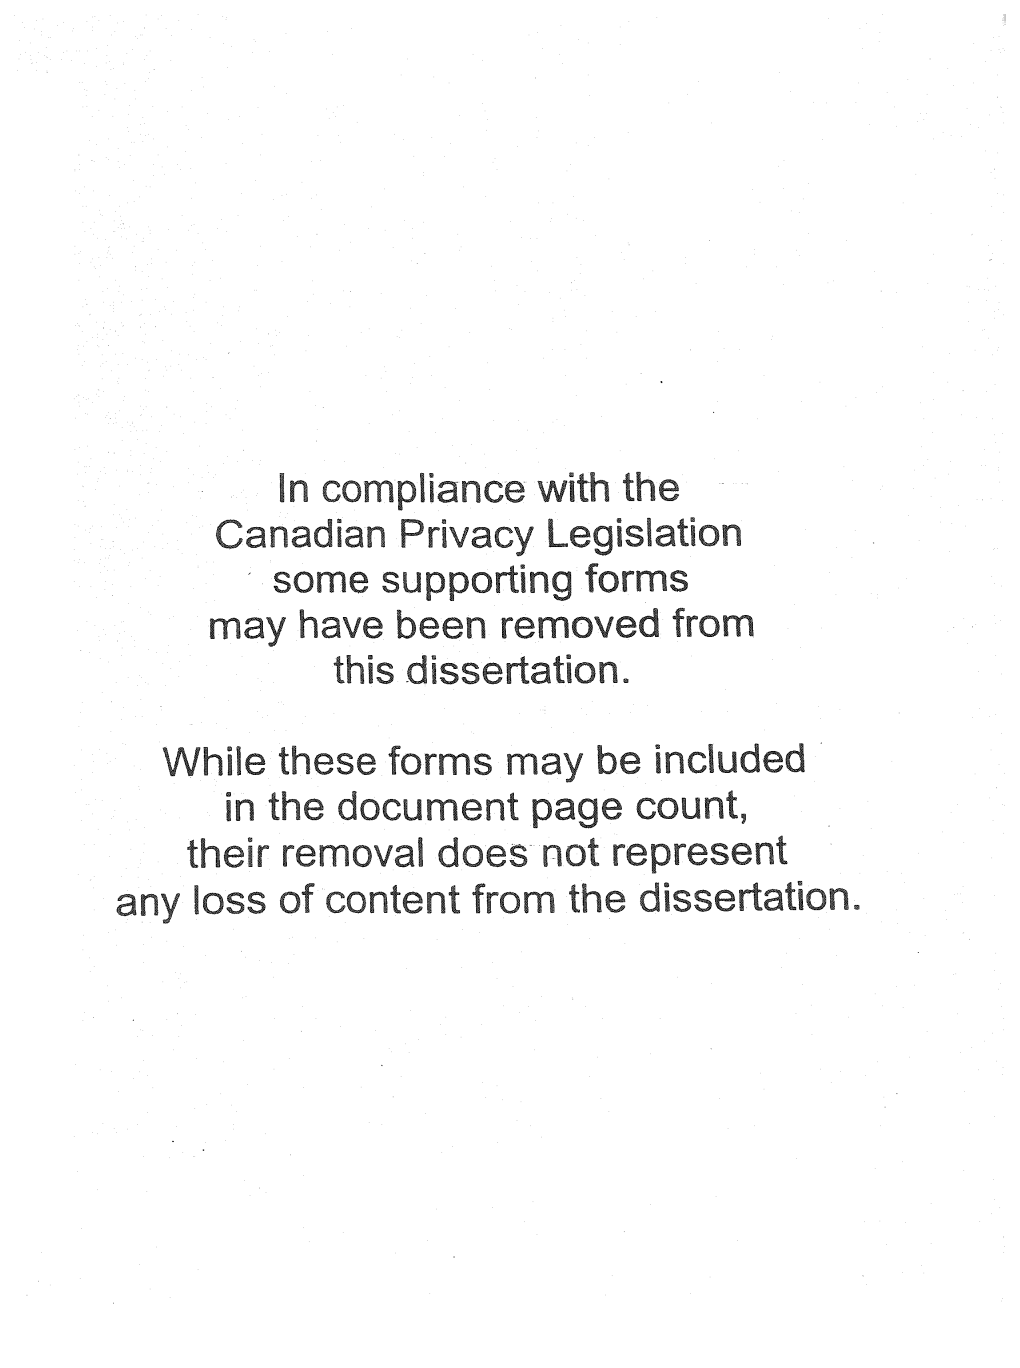 Ln Compliance with the Canadian Privacy Legislation , Sorne Supporting Forms May Have Been Removed from This .Dissertation. Whil